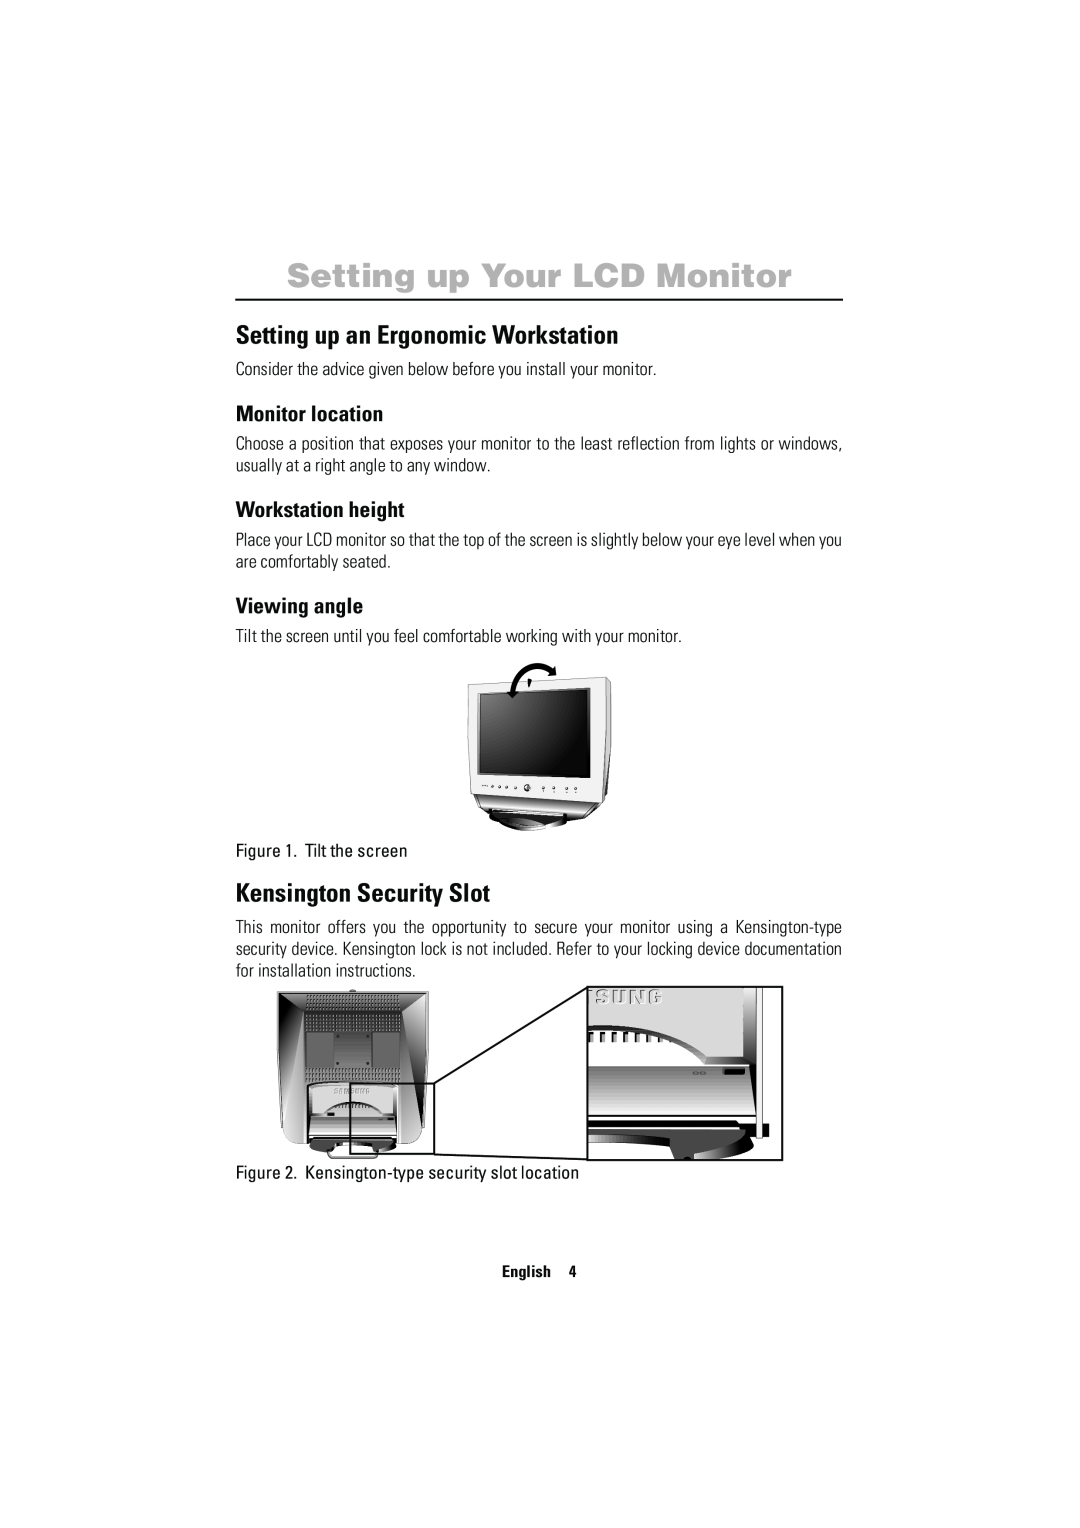 Samsung 150MP Setting up Your LCD Monitor, Setting up an Ergonomic Workstation, Kensington Security Slot, Monitor location 